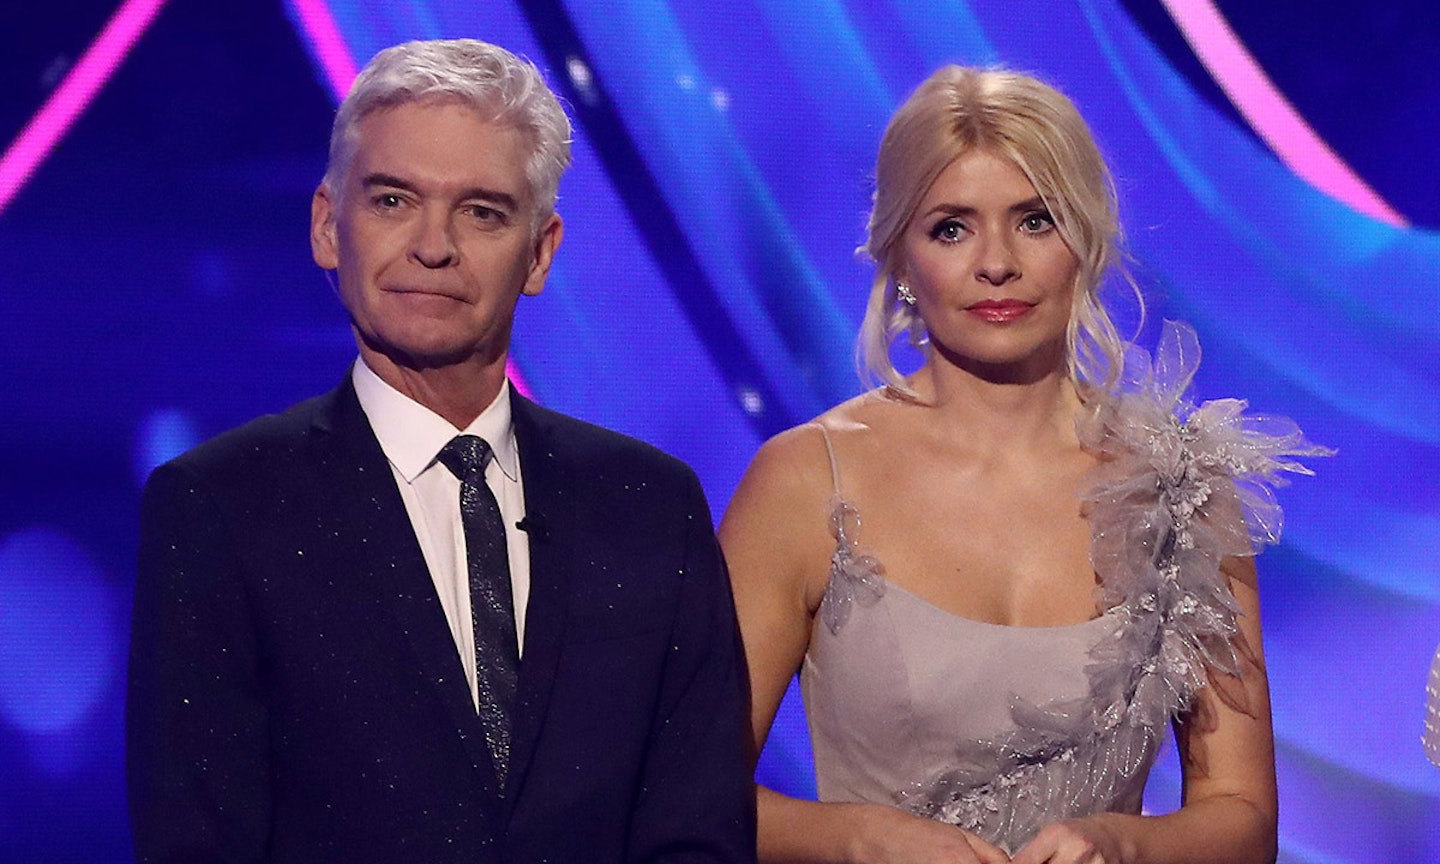 Holly Willoughby Phillip Schofield 